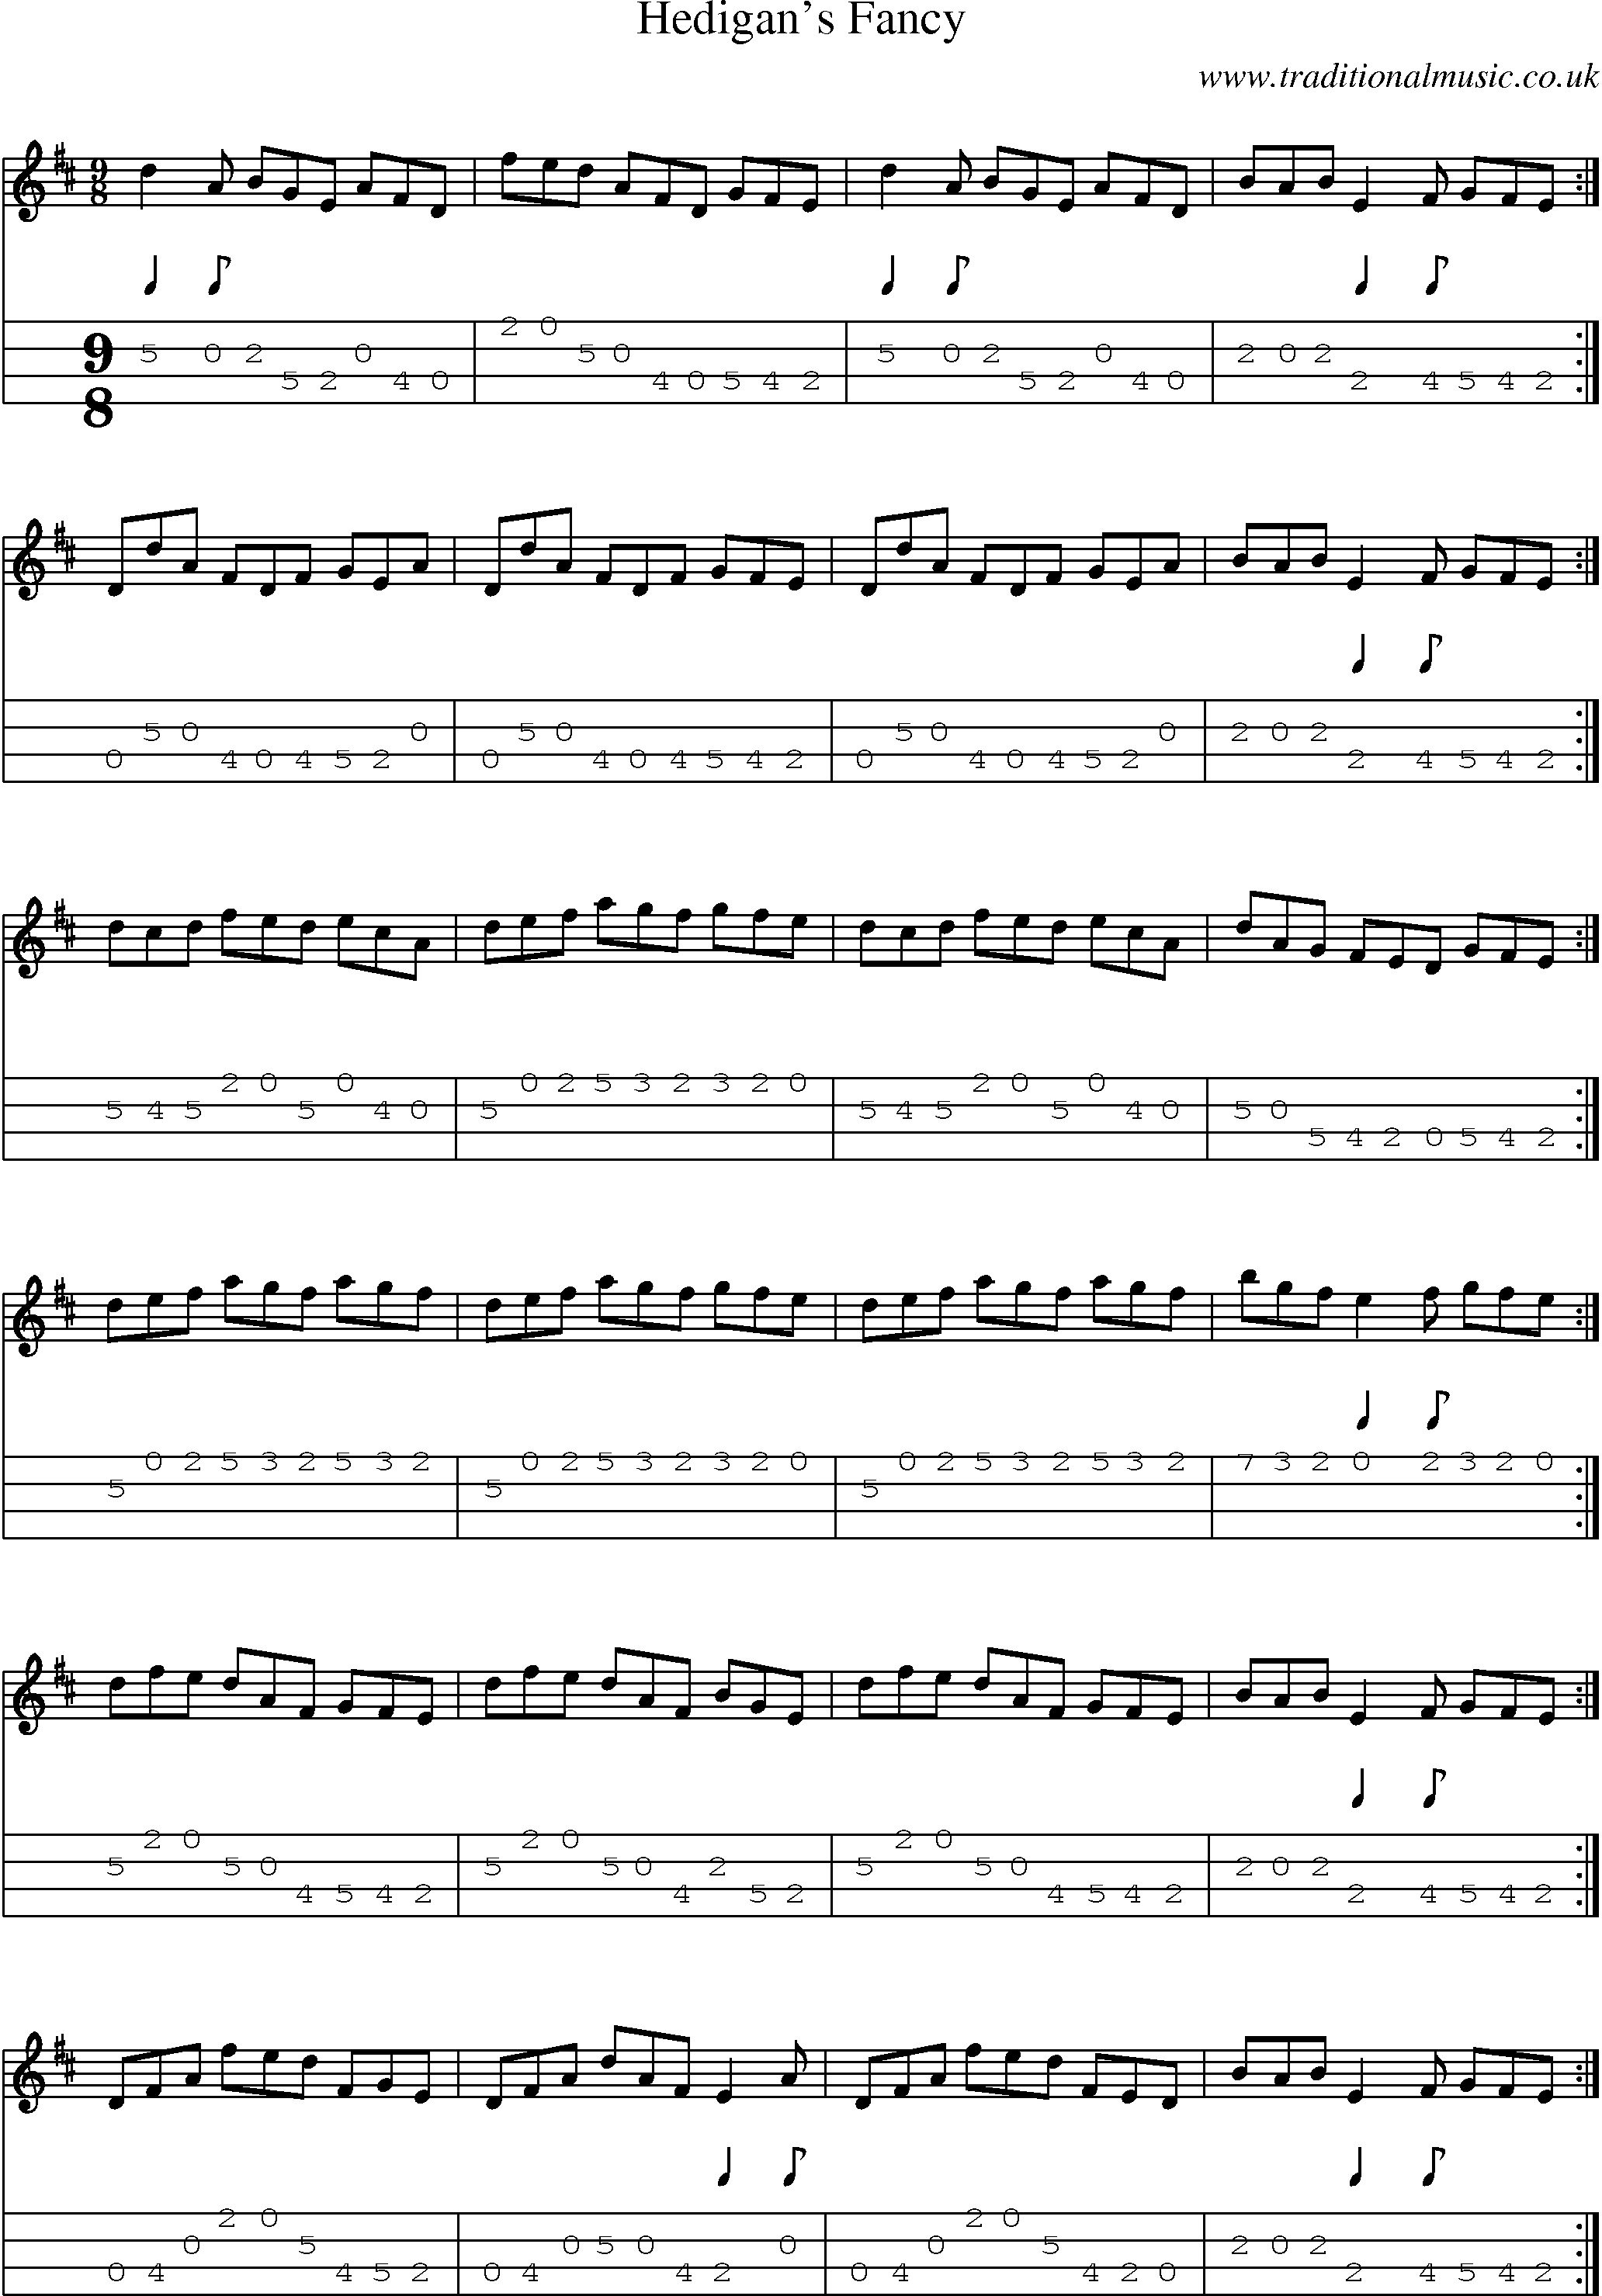 Music Score and Mandolin Tabs for Hedigans Fancy